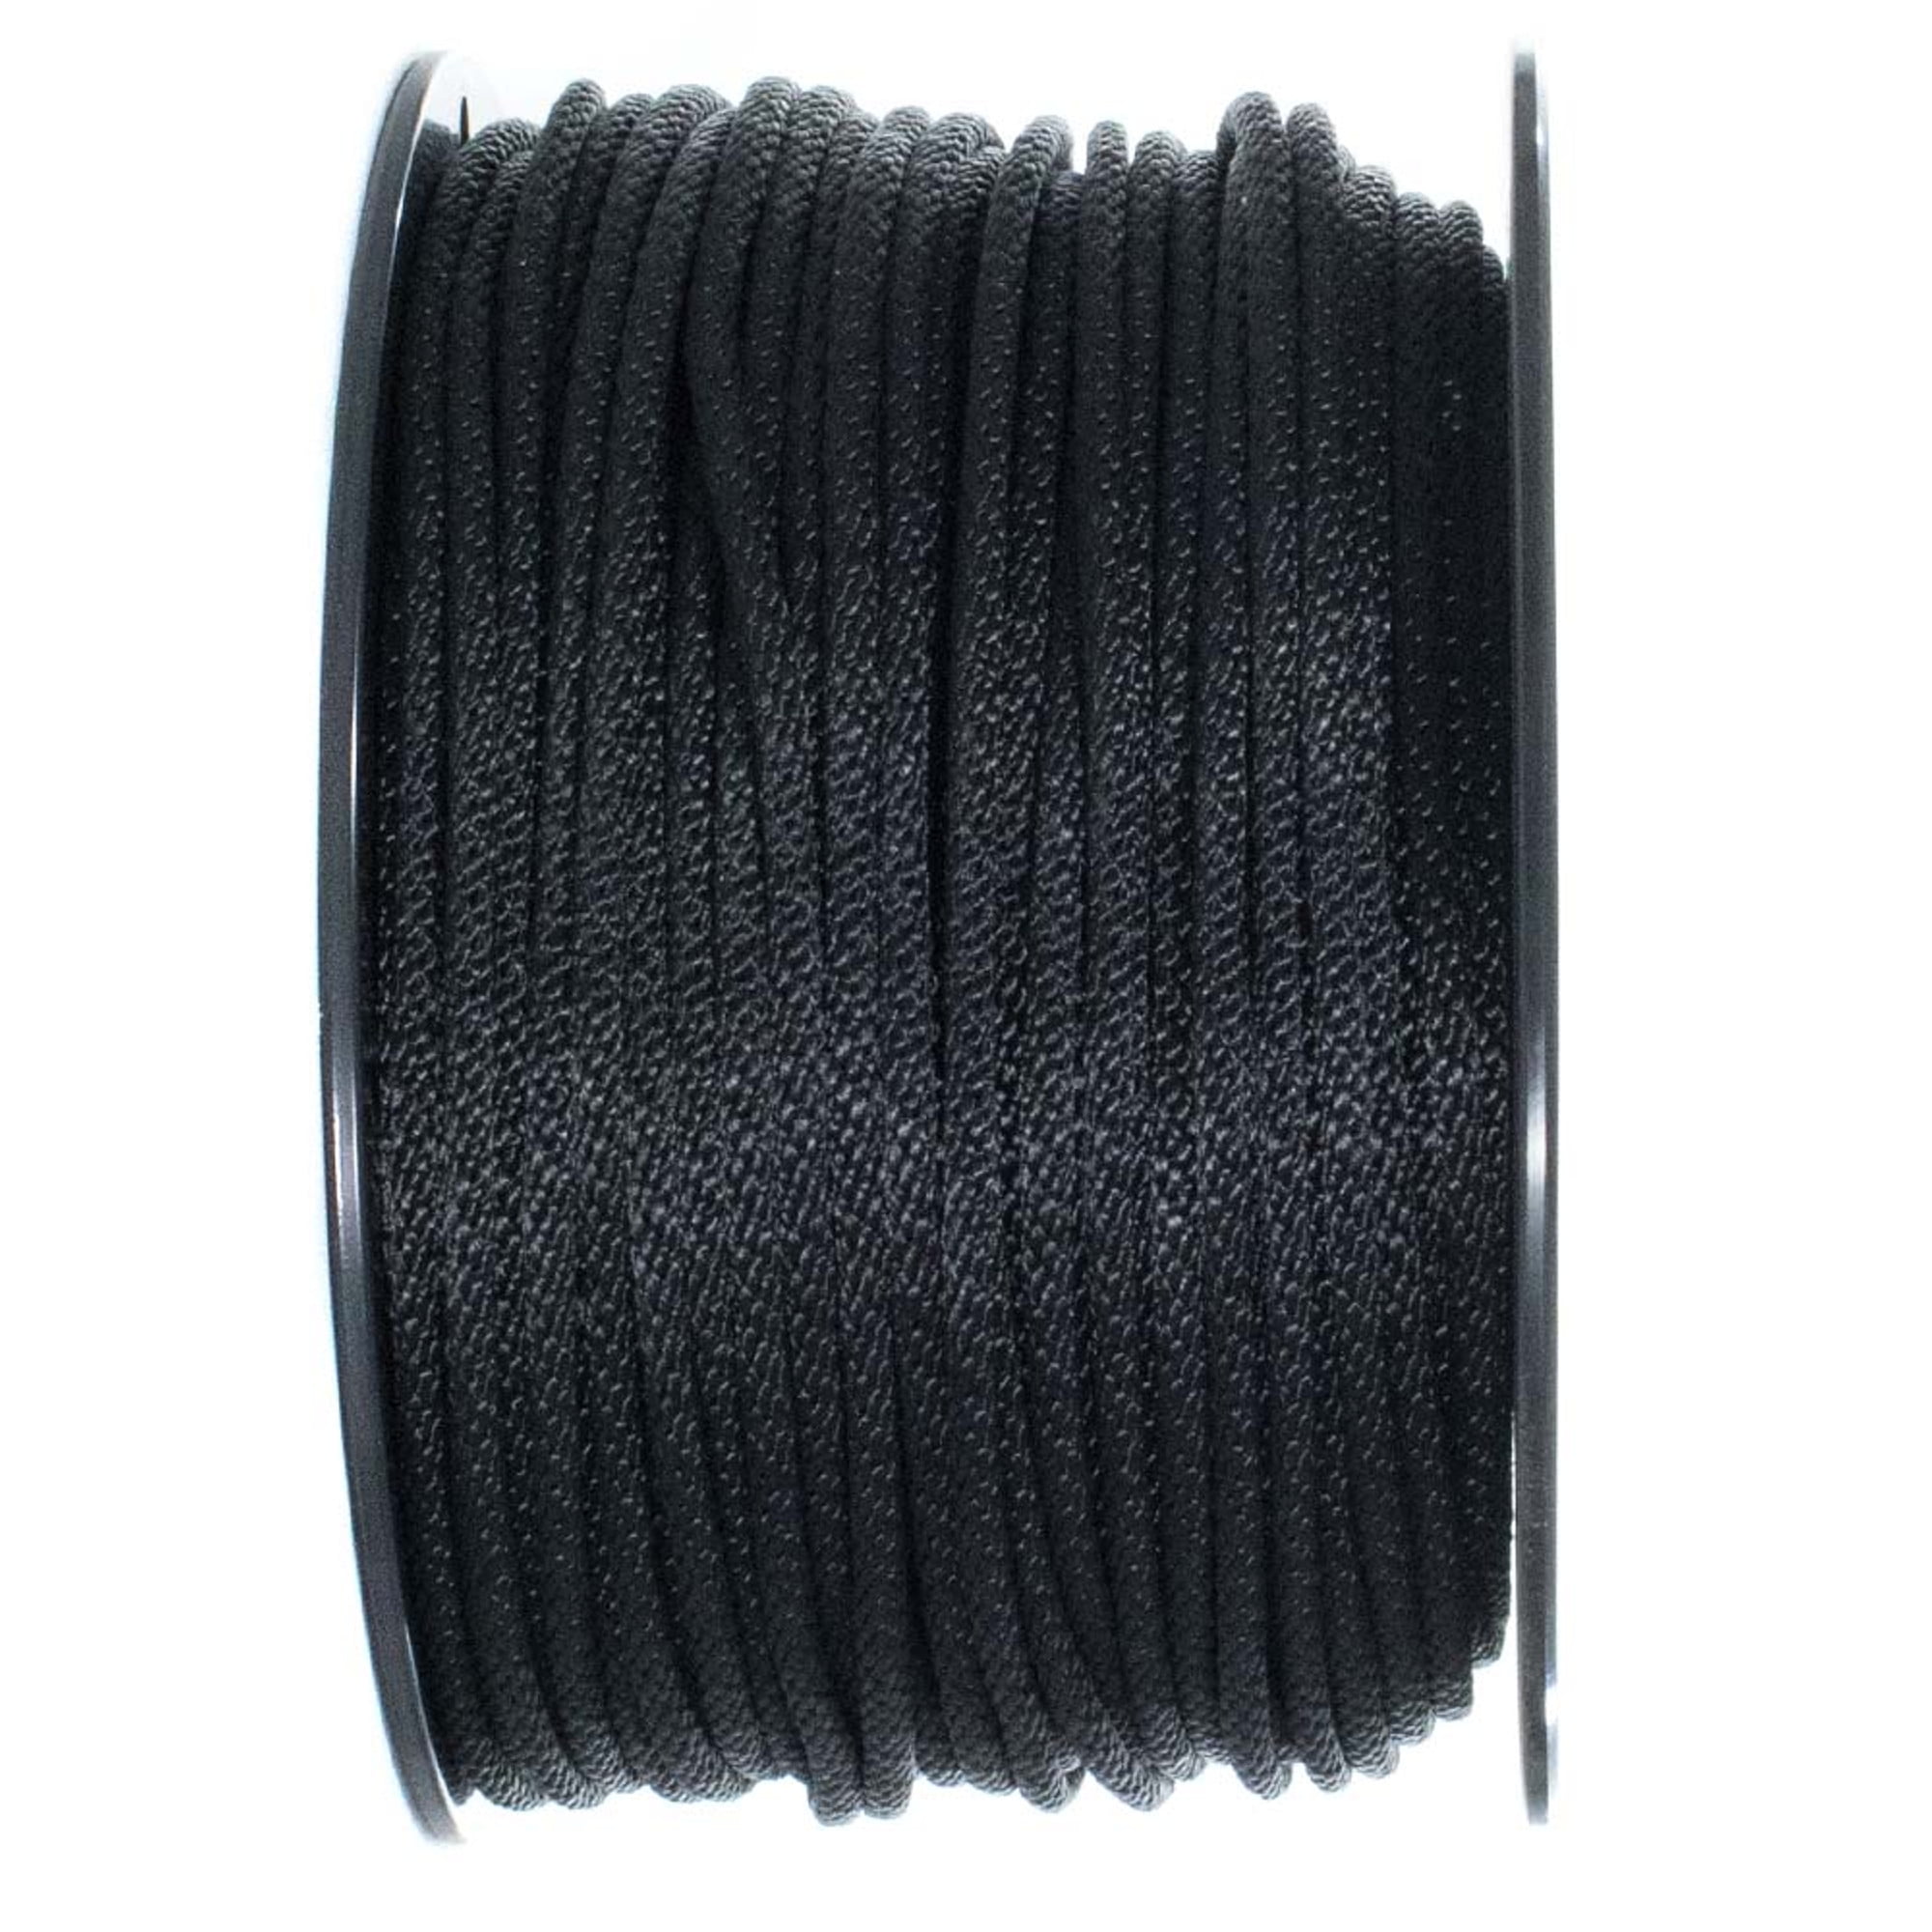 Black 3/8" x 100 ft Made in USA. Pre-Cut Solid Braid Polyester rope hank 